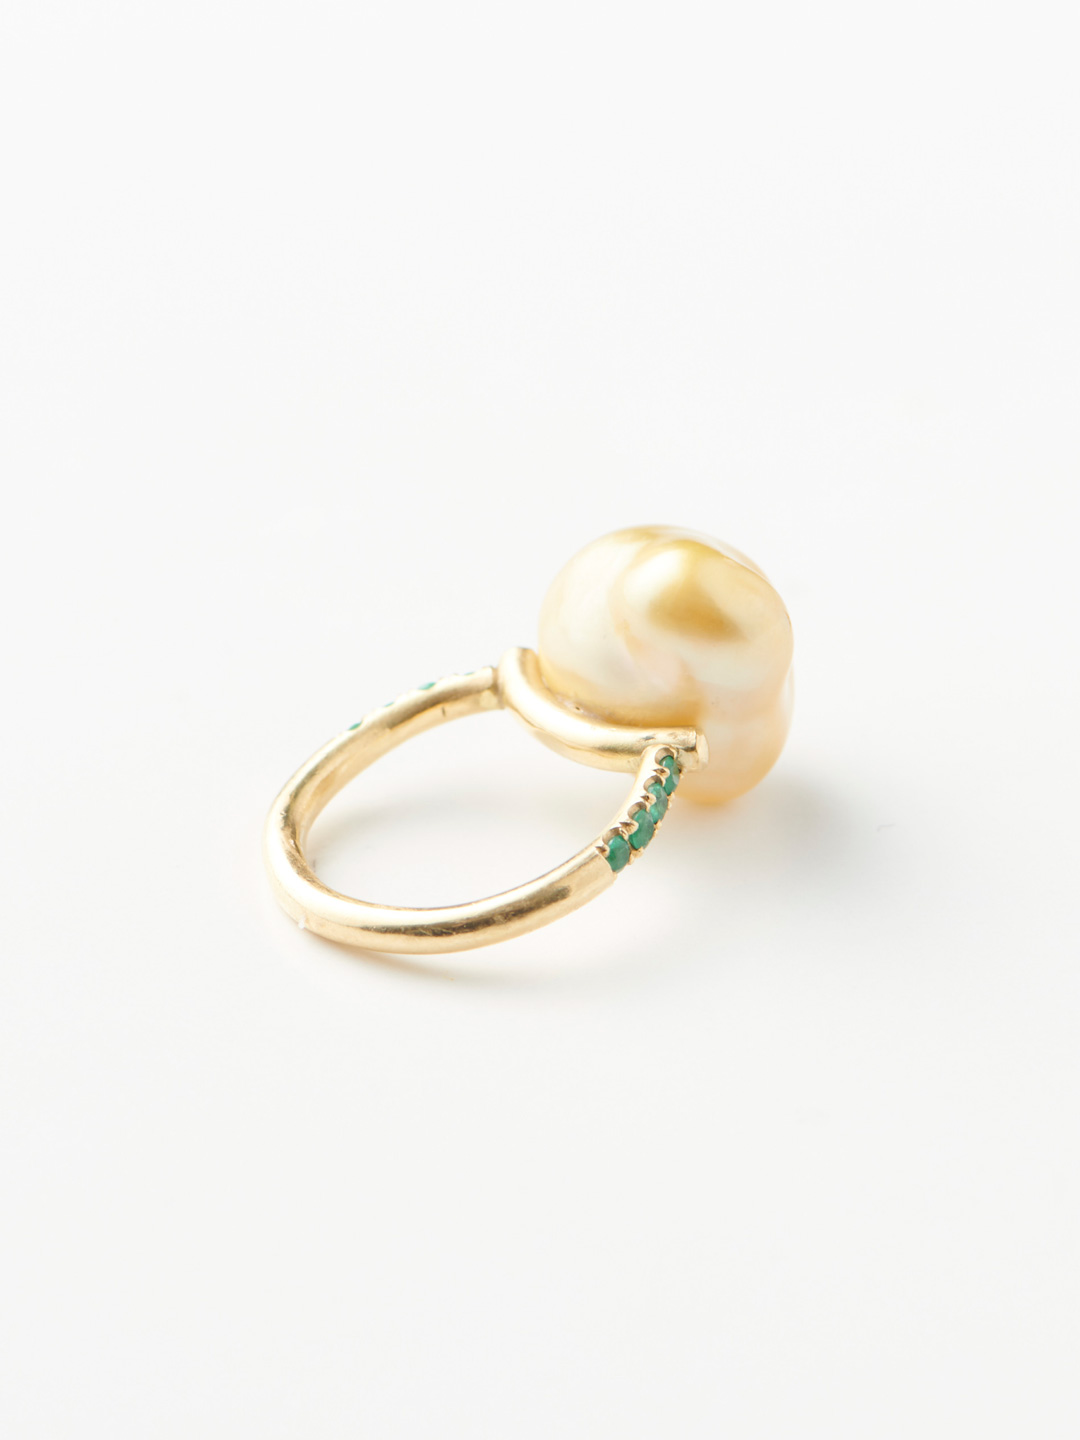 Emerald&South Sea Pearl Ring - Gold